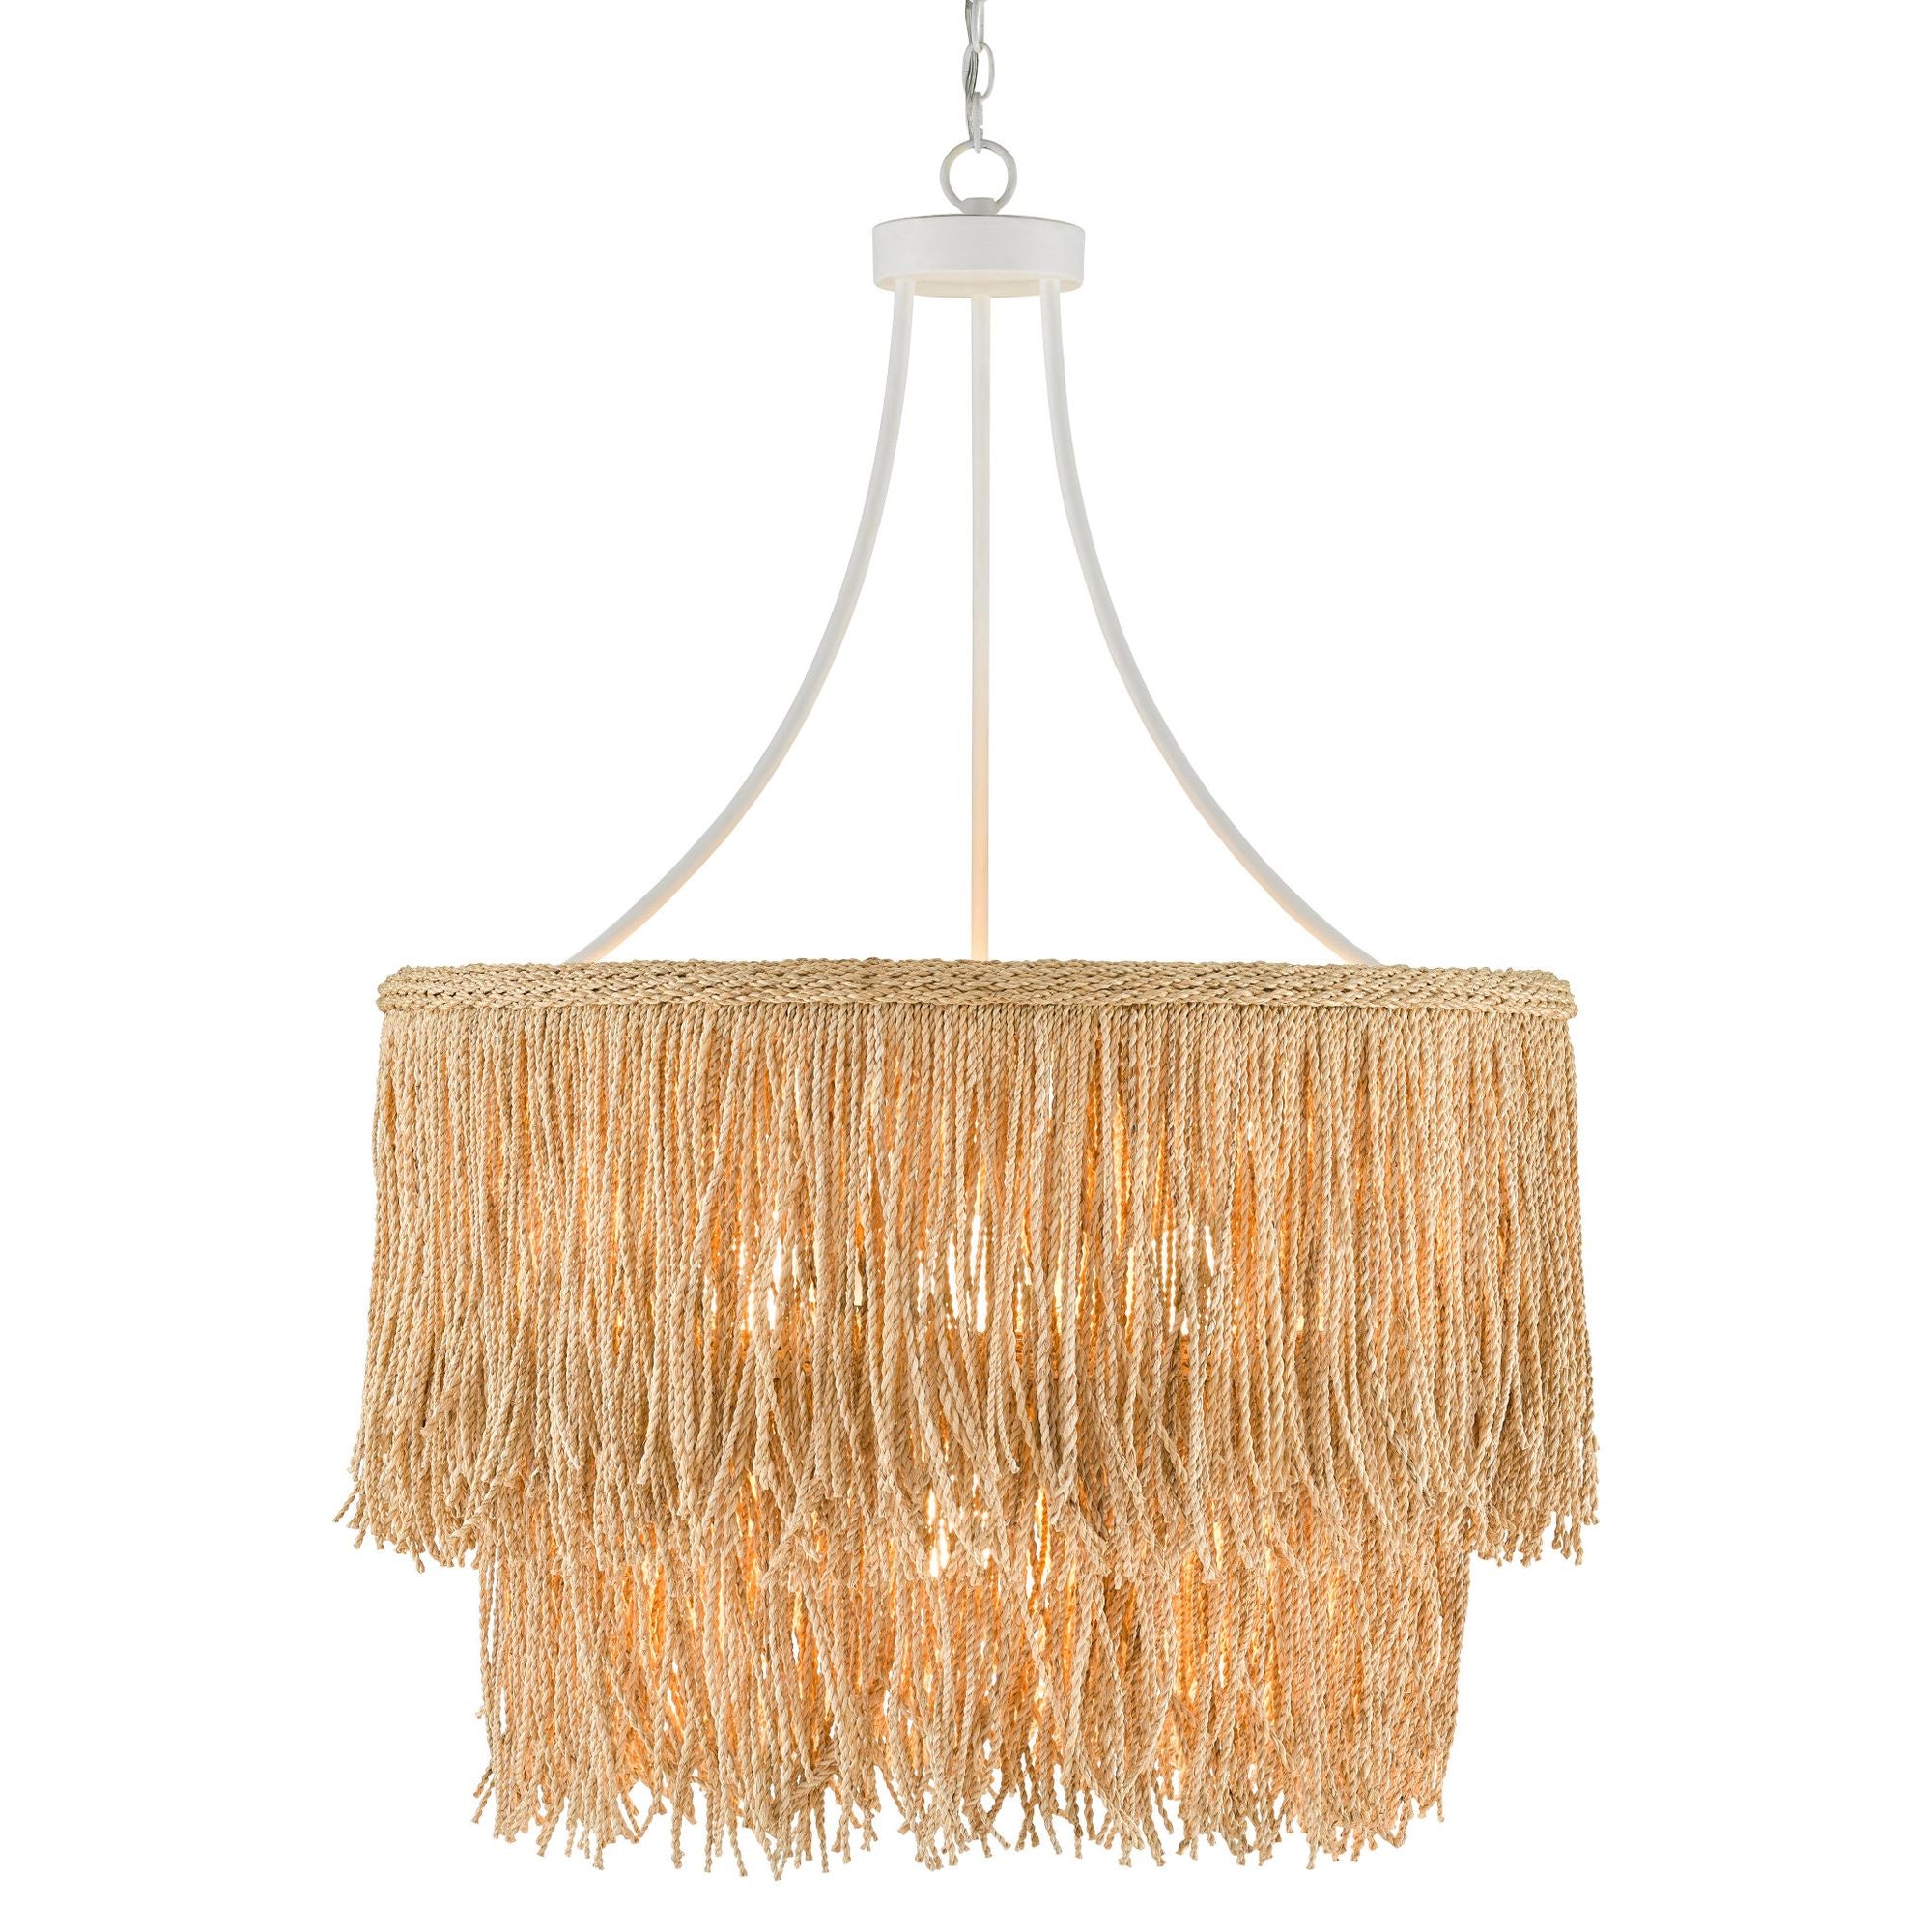 Samoa Rope Two-Tiered Chandelier - Gesso White/Natural Rope